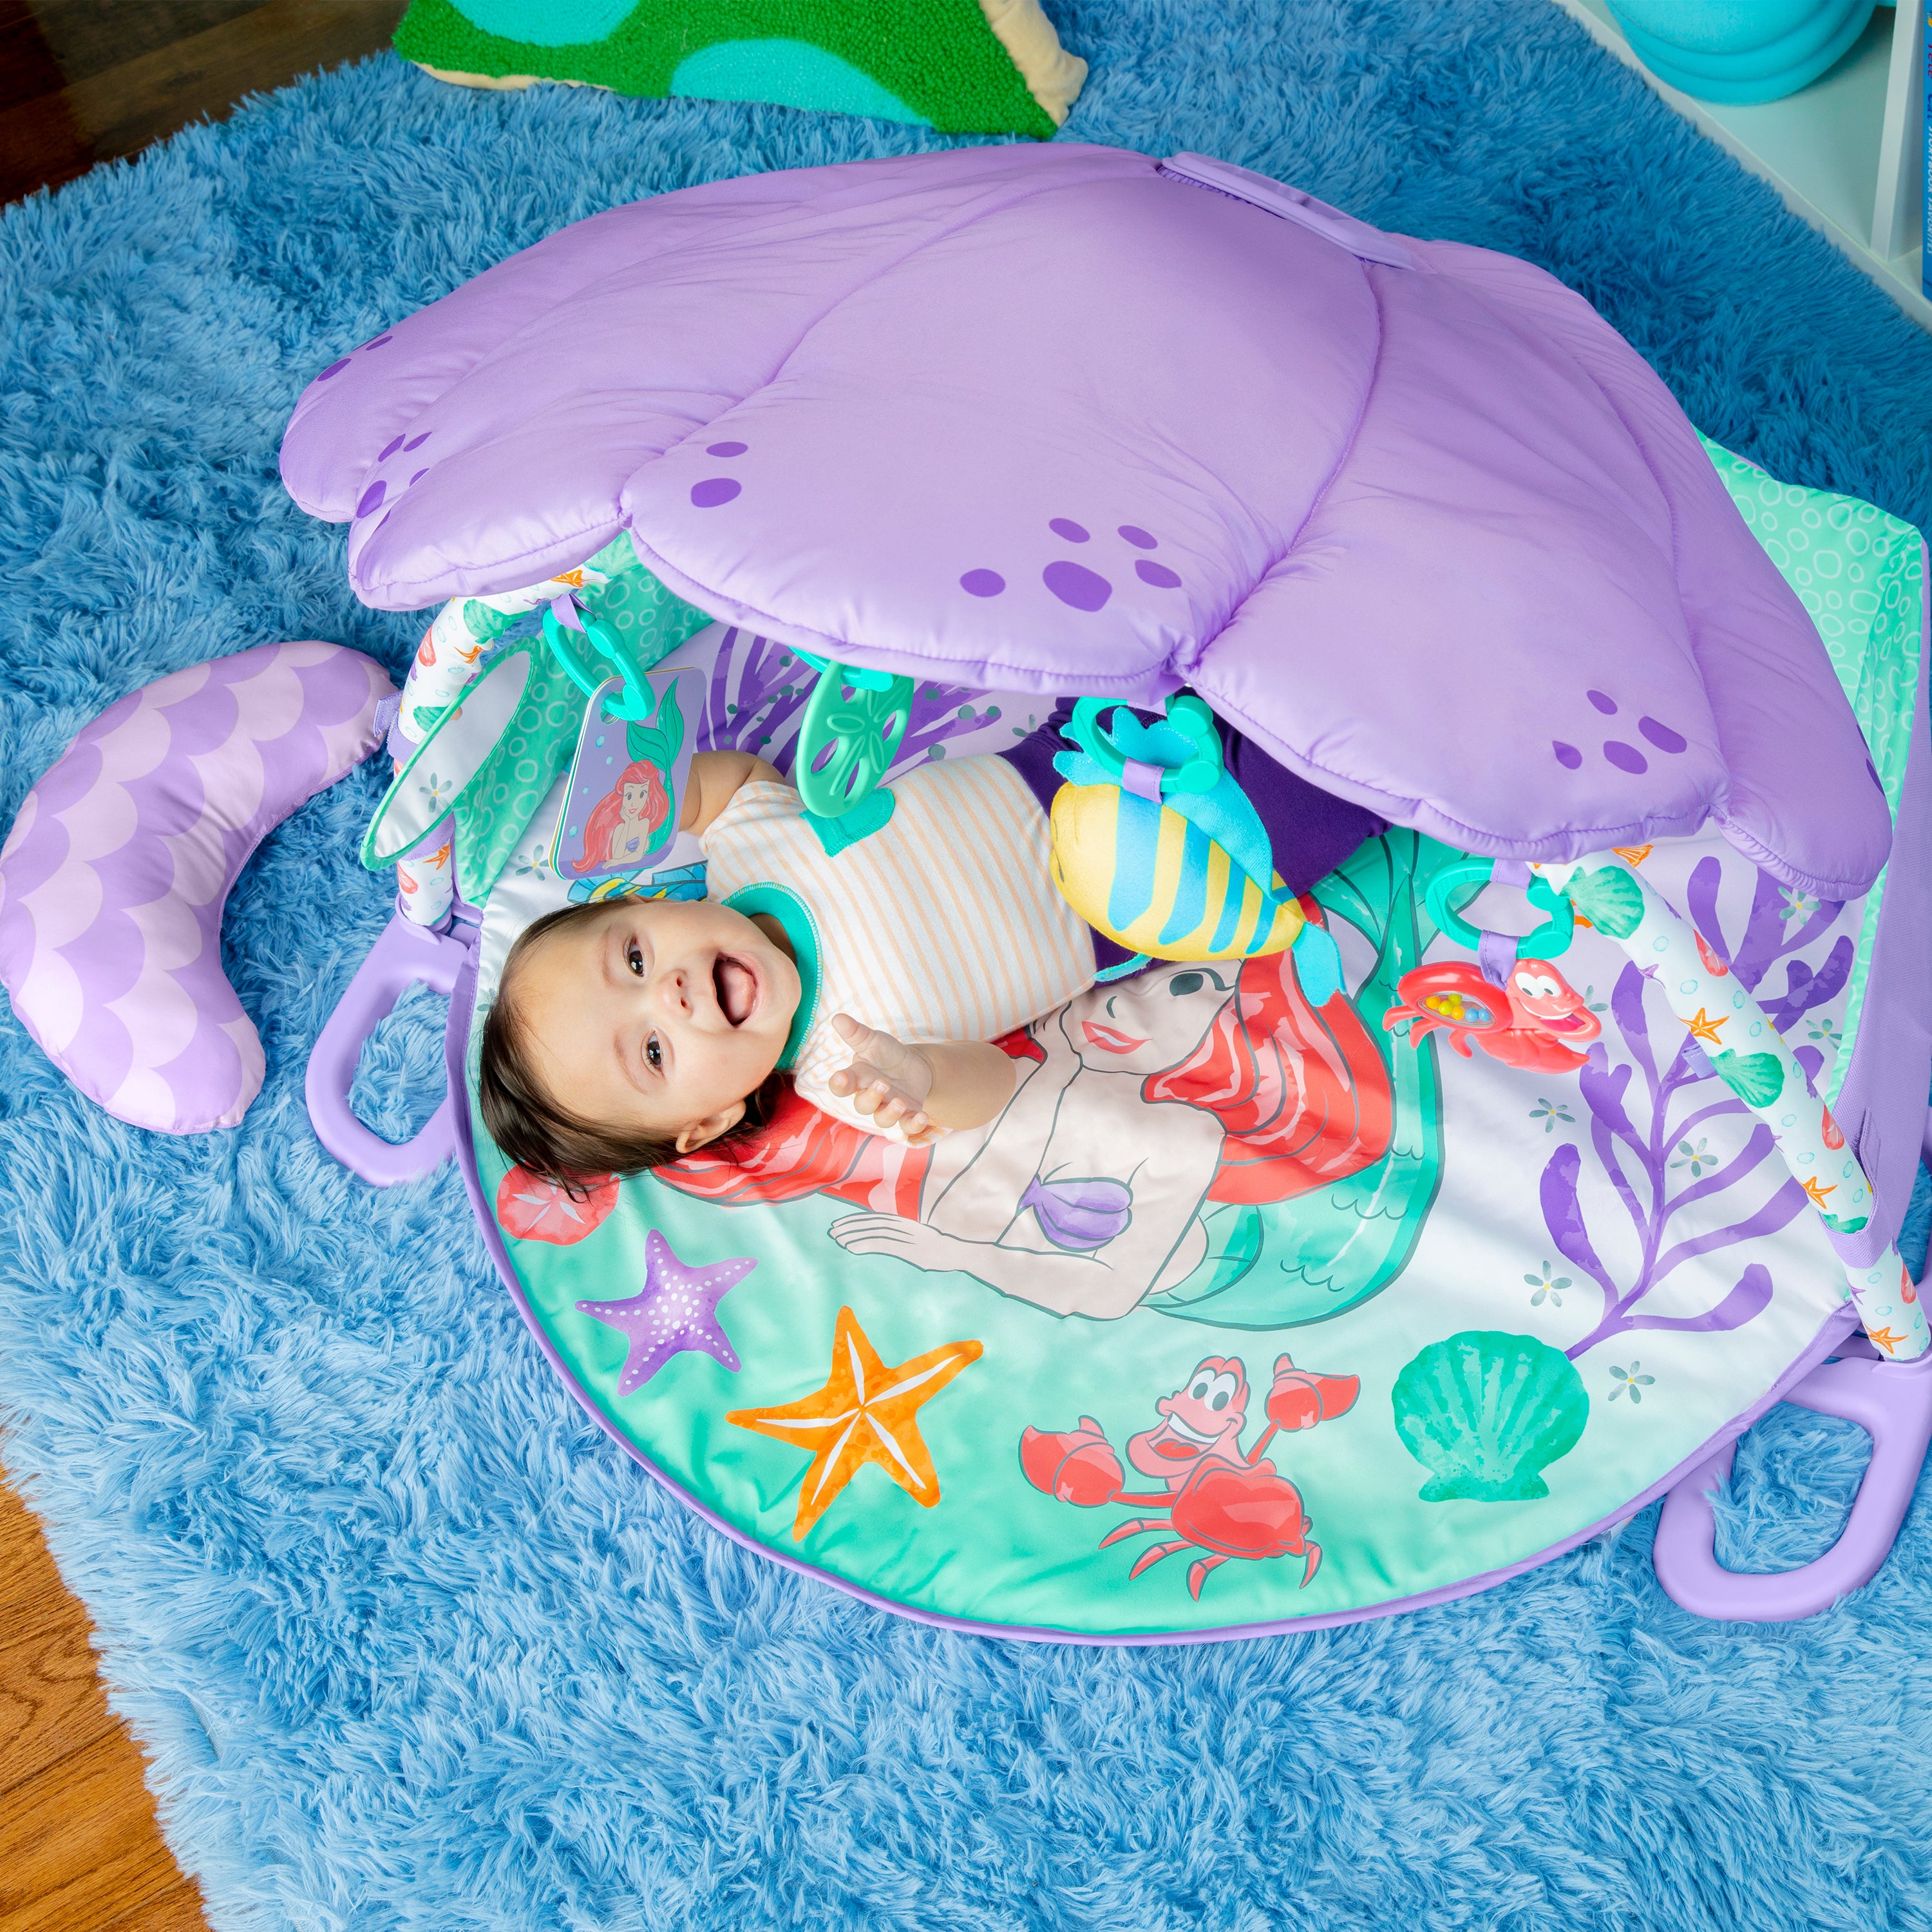 Bright Starts - The Little Mermaid Twinkle Trove Lights & Music Activity Gym